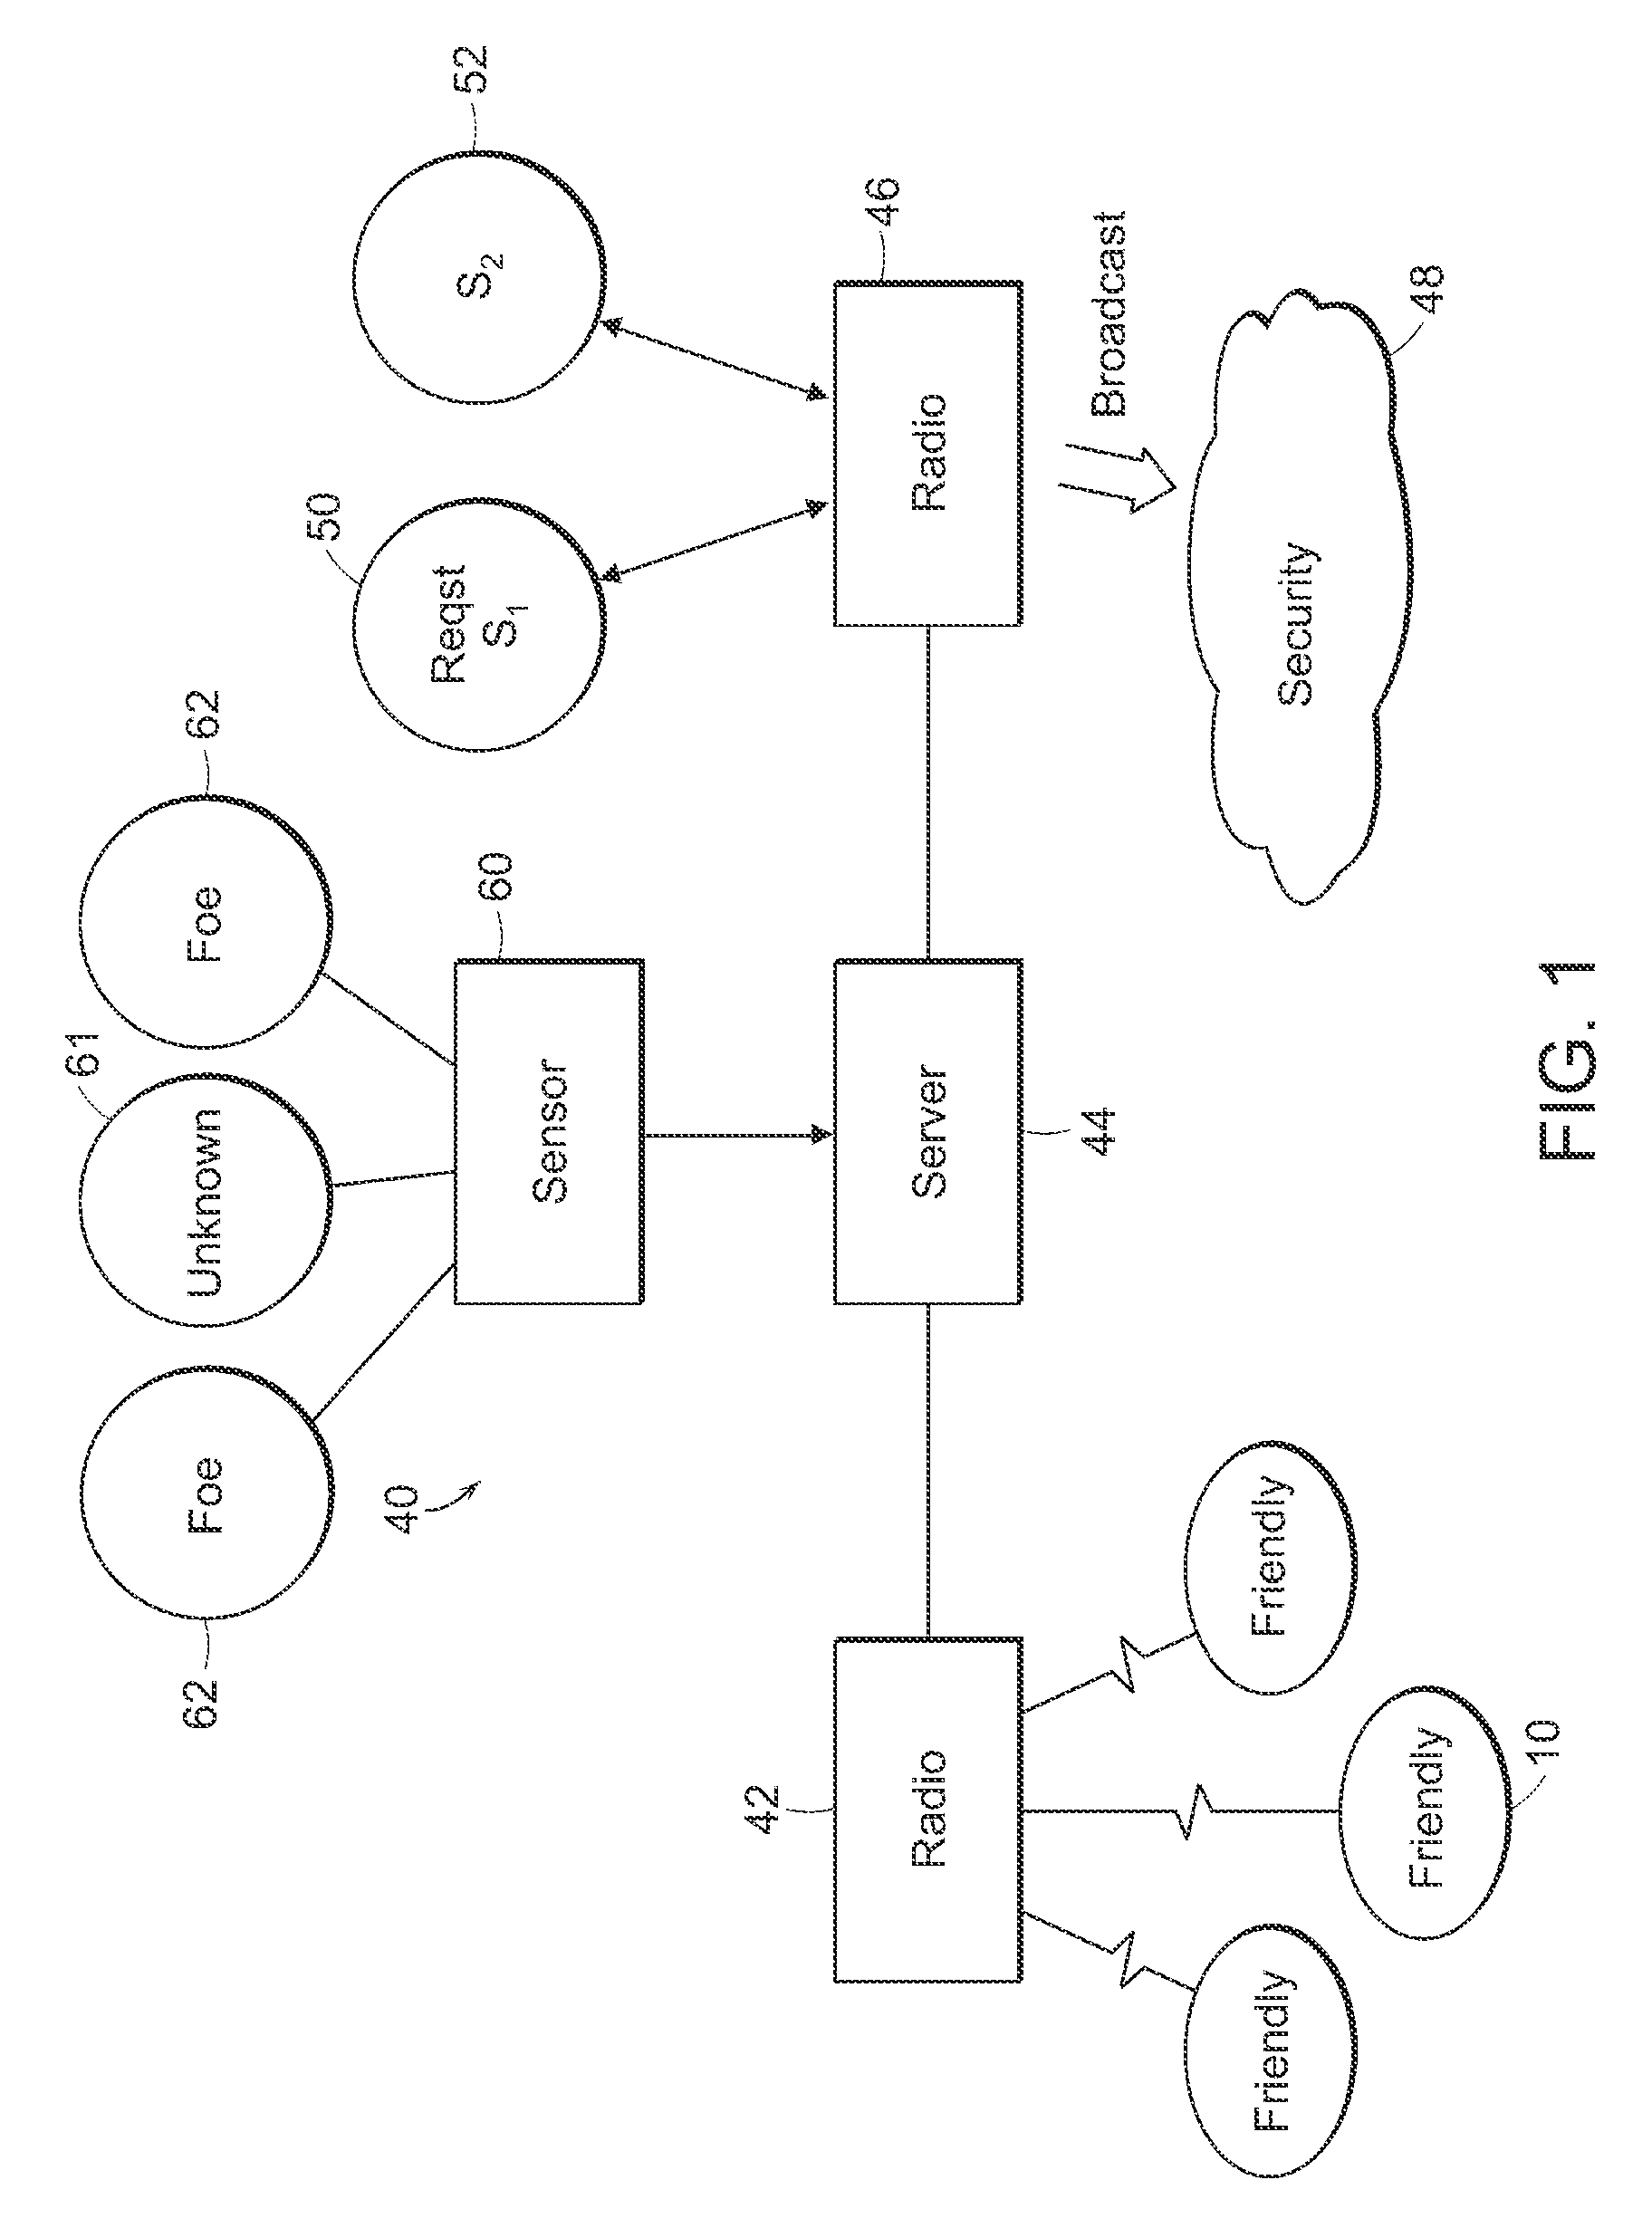 GPS Based Situational Awareness and Identification System and Method